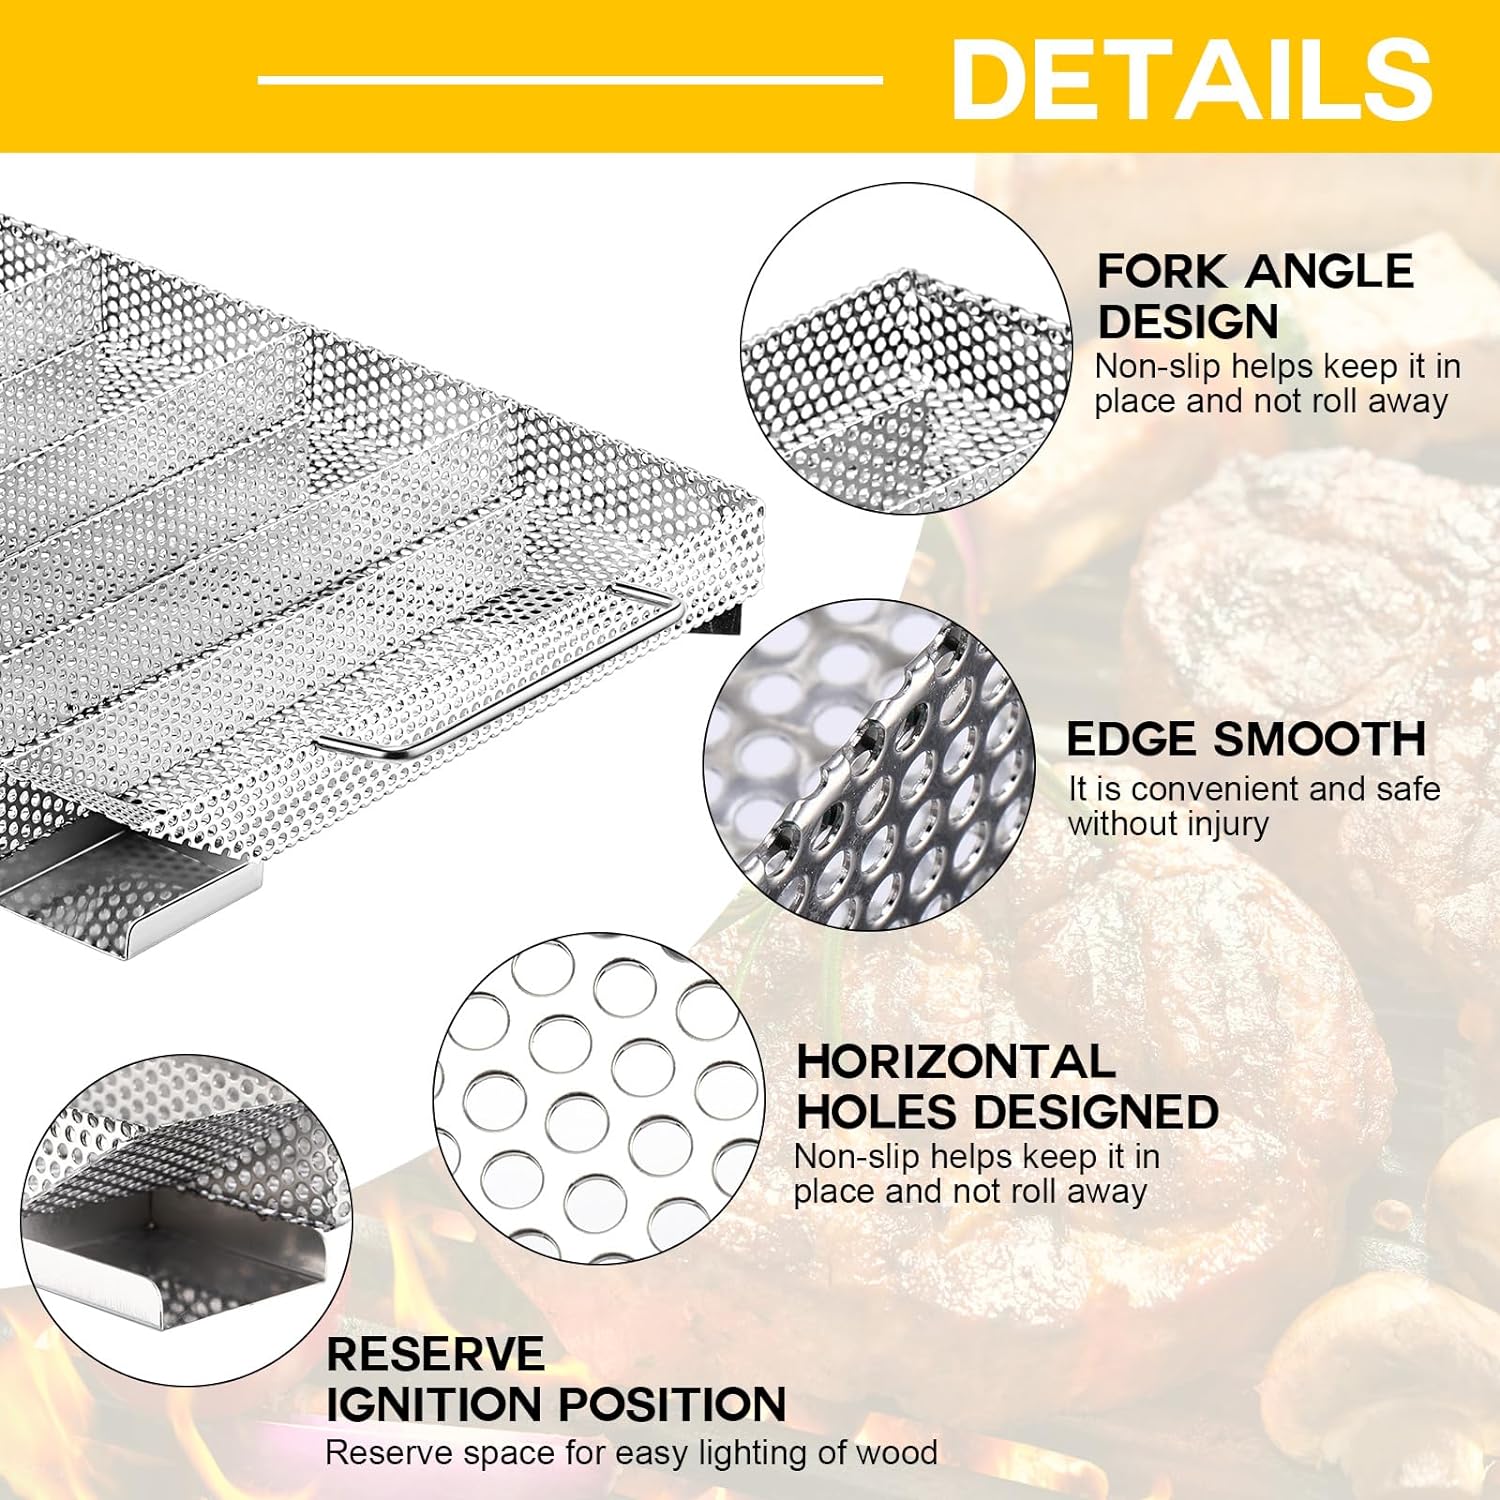 VIHOSE Stainless Steel Cold Smoke Generator Oversized Pellet Maze Smoker Tray Hot and Cold Smoking Tray BBQ Saw Charcoal Gas Grill Outdoor Smokers for Meat Cheese Fish Pork Smoking (S Style) - VIHOSE Stainless Steel Cold Smoke Generator Oversized Pellet Maze Smoker Tray Hot And Cold Smoking Tray Review